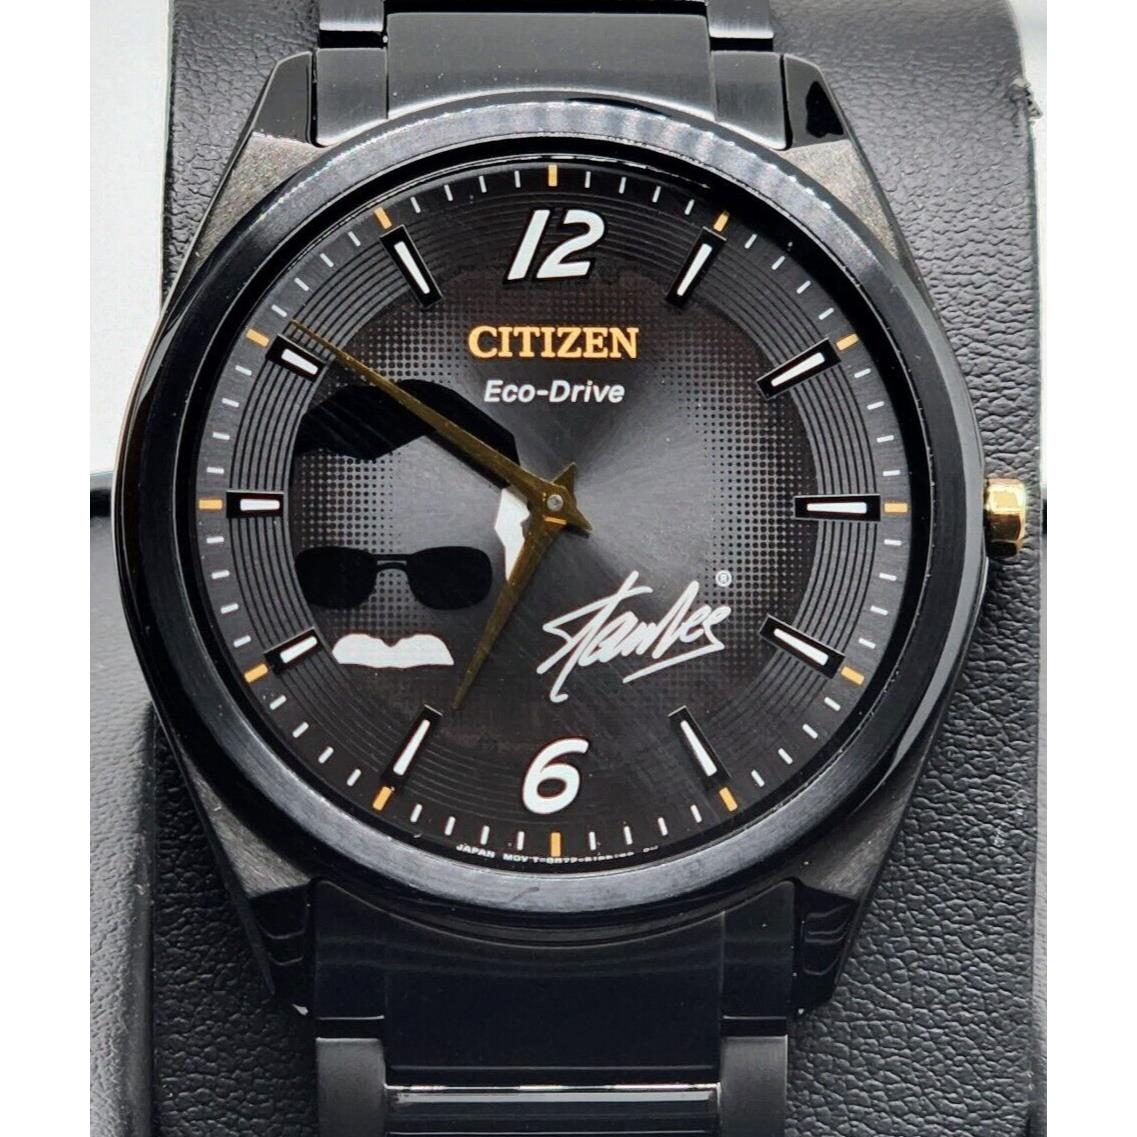 Citizen Stan Lee Limited Edition AR3077-56W Marvel Sapphire Crystal Watch